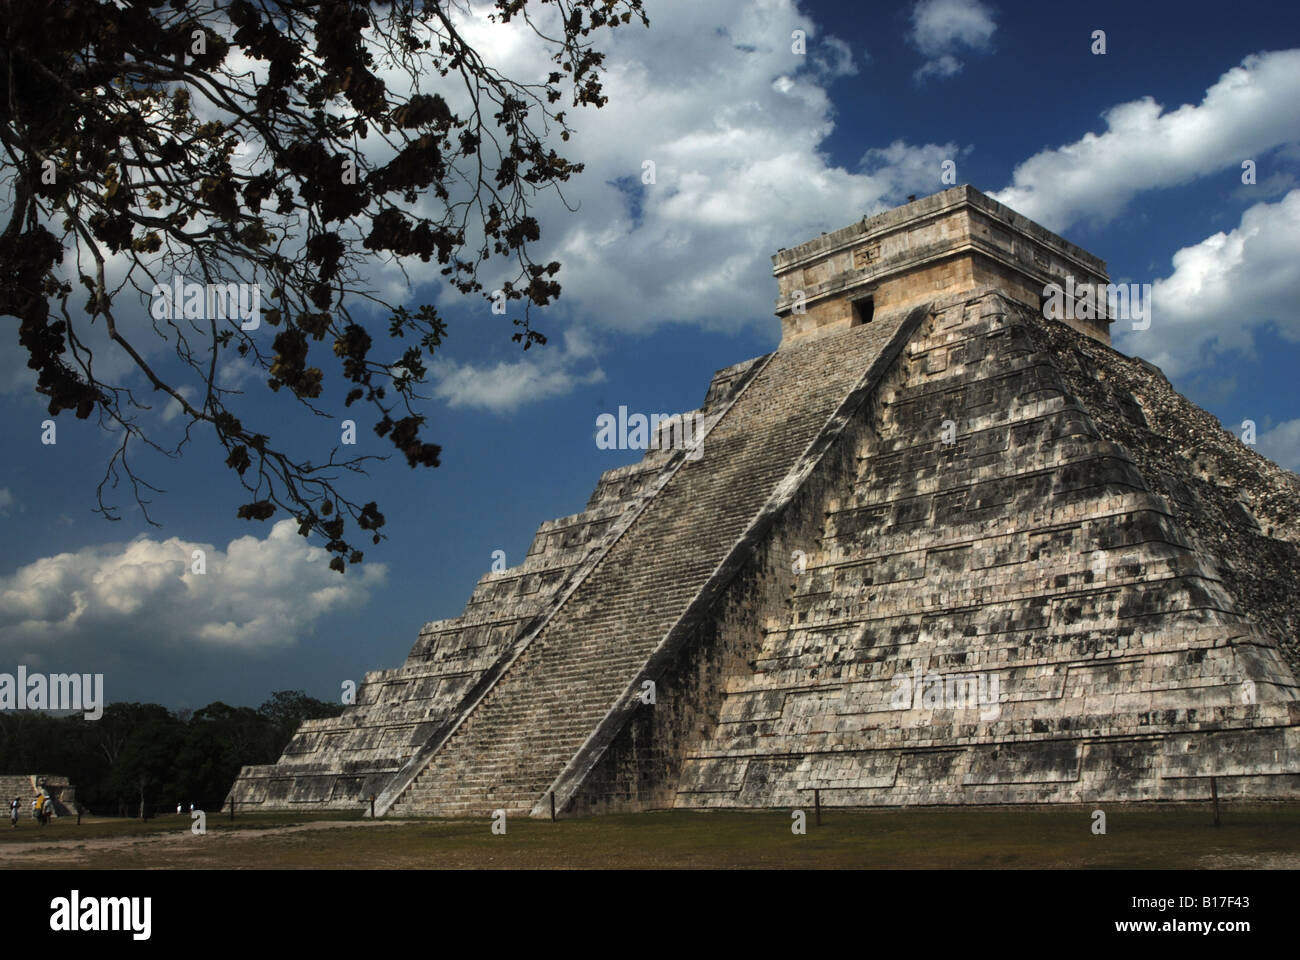 The Mayan temple of Chitchen Itza, Mexico Stock Photo